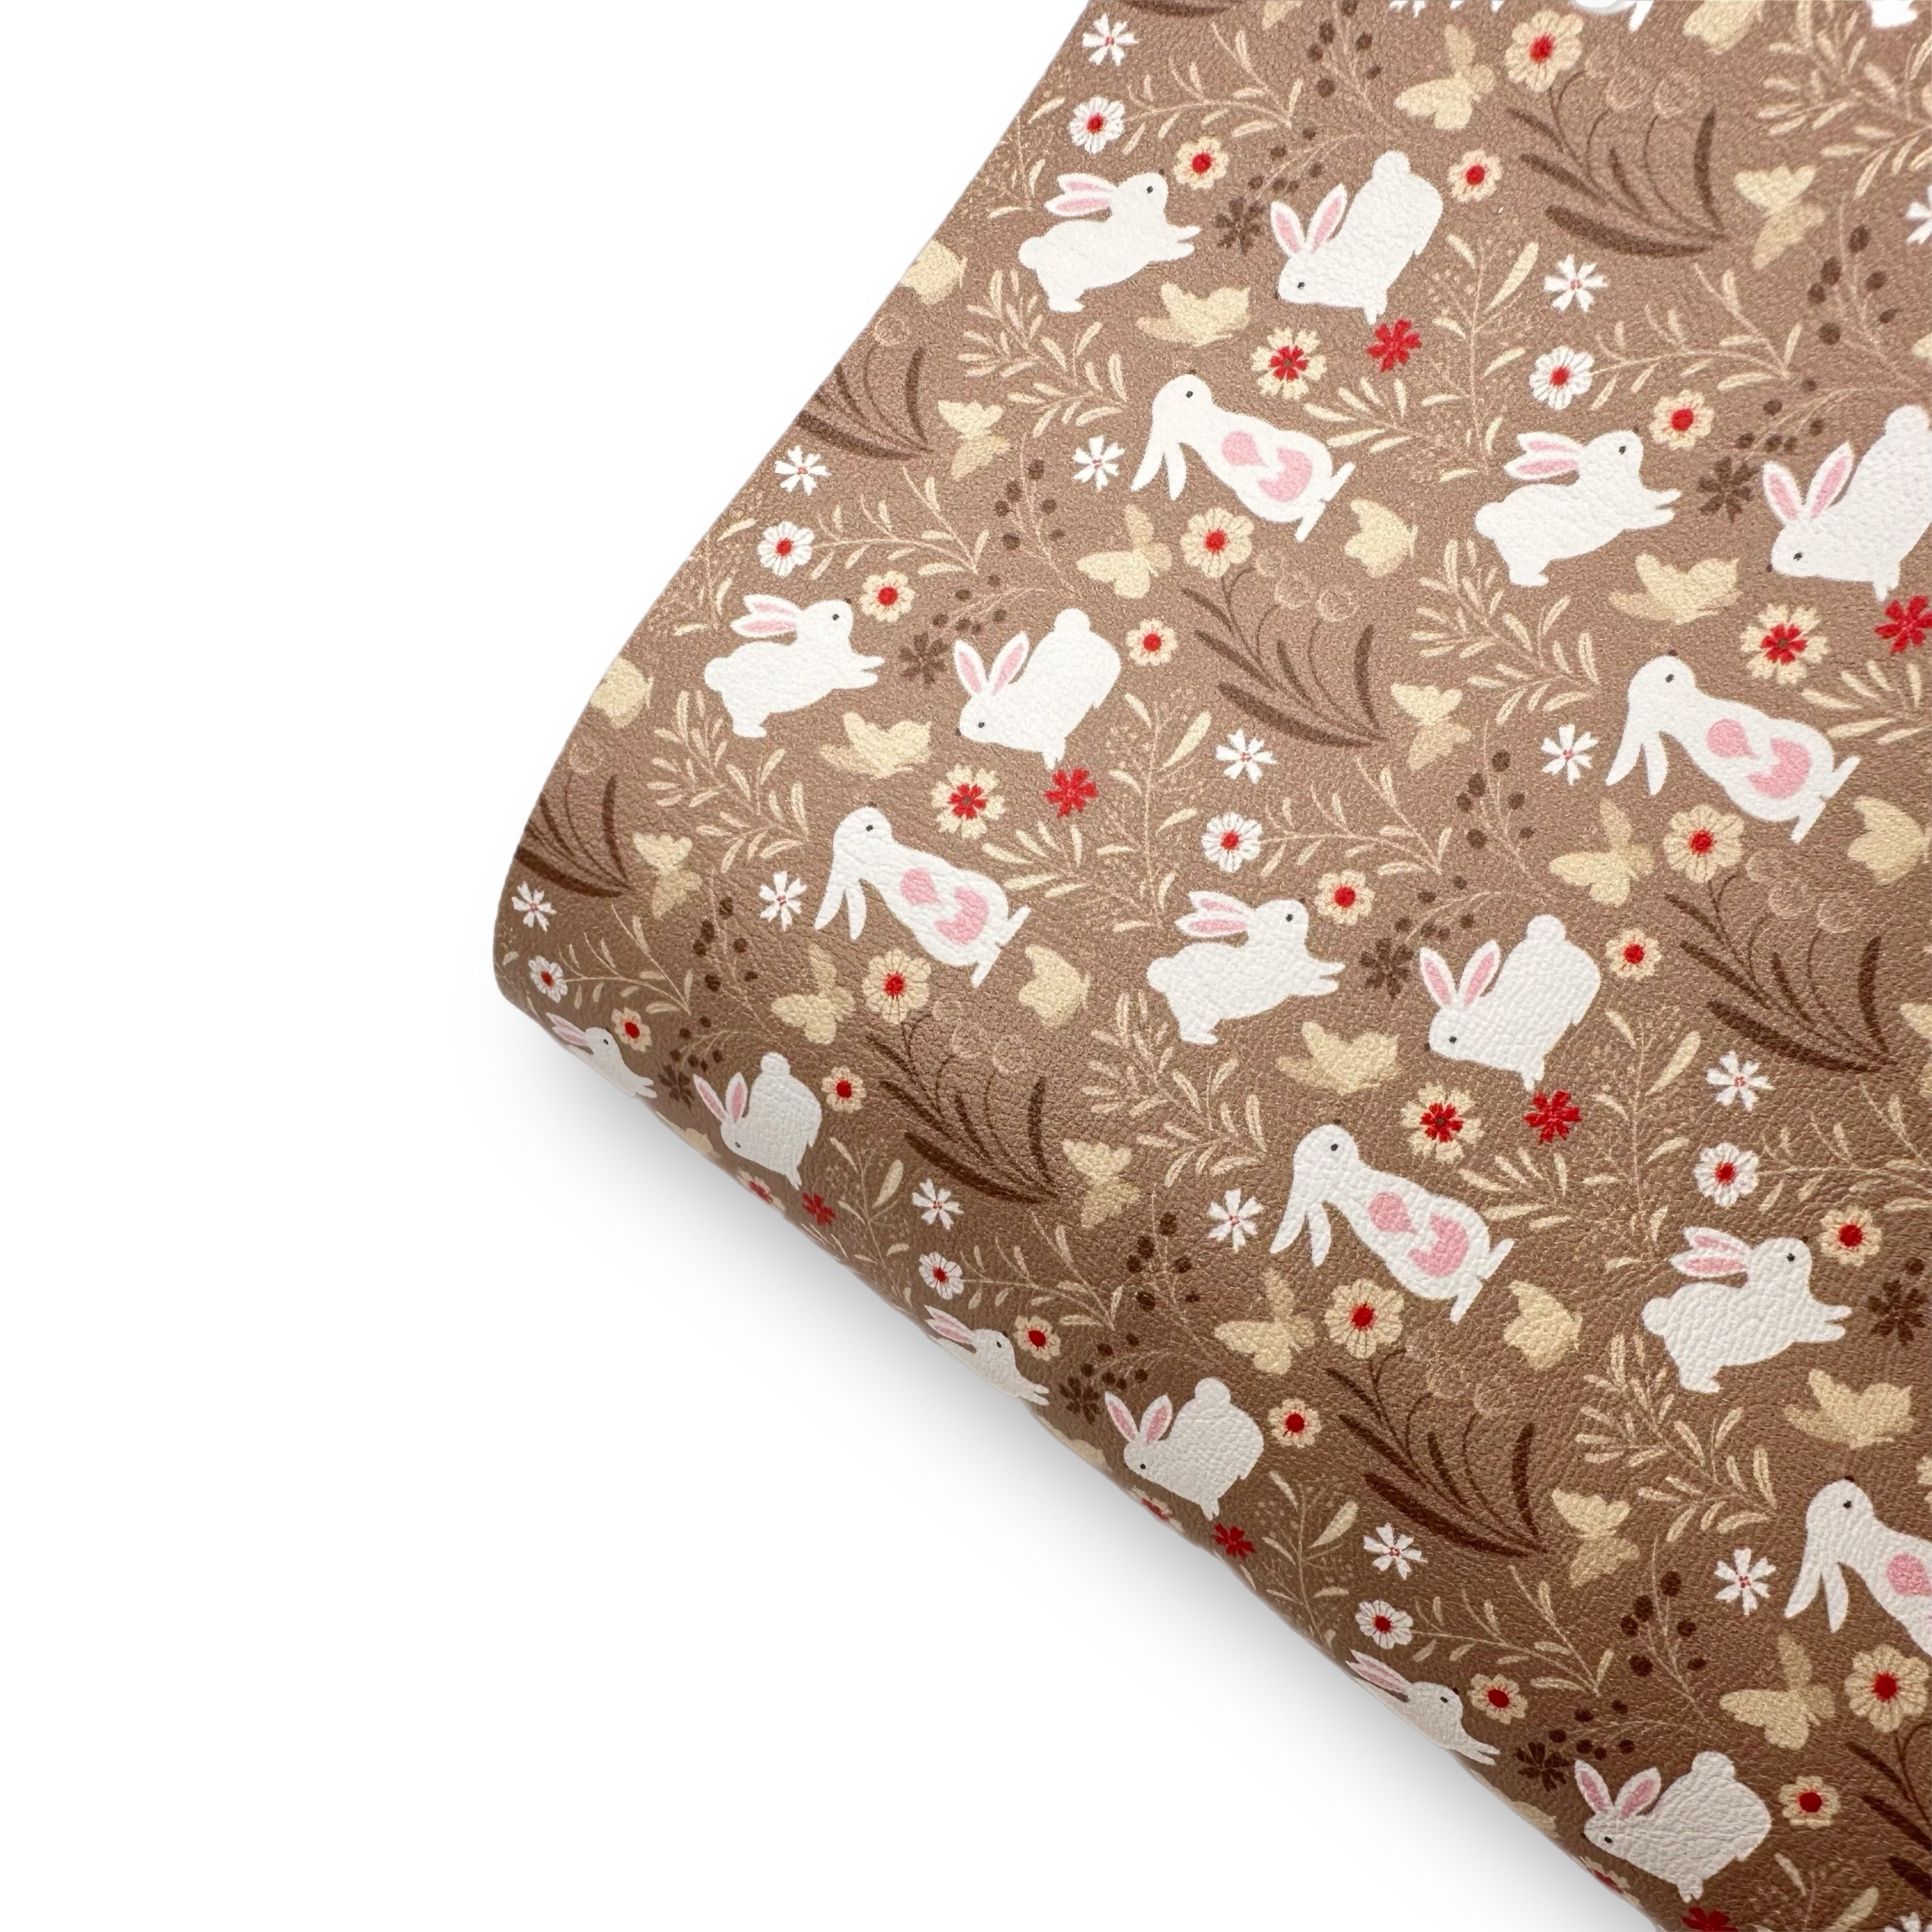 Whimsical Bunny Premium Faux Leather Fabric